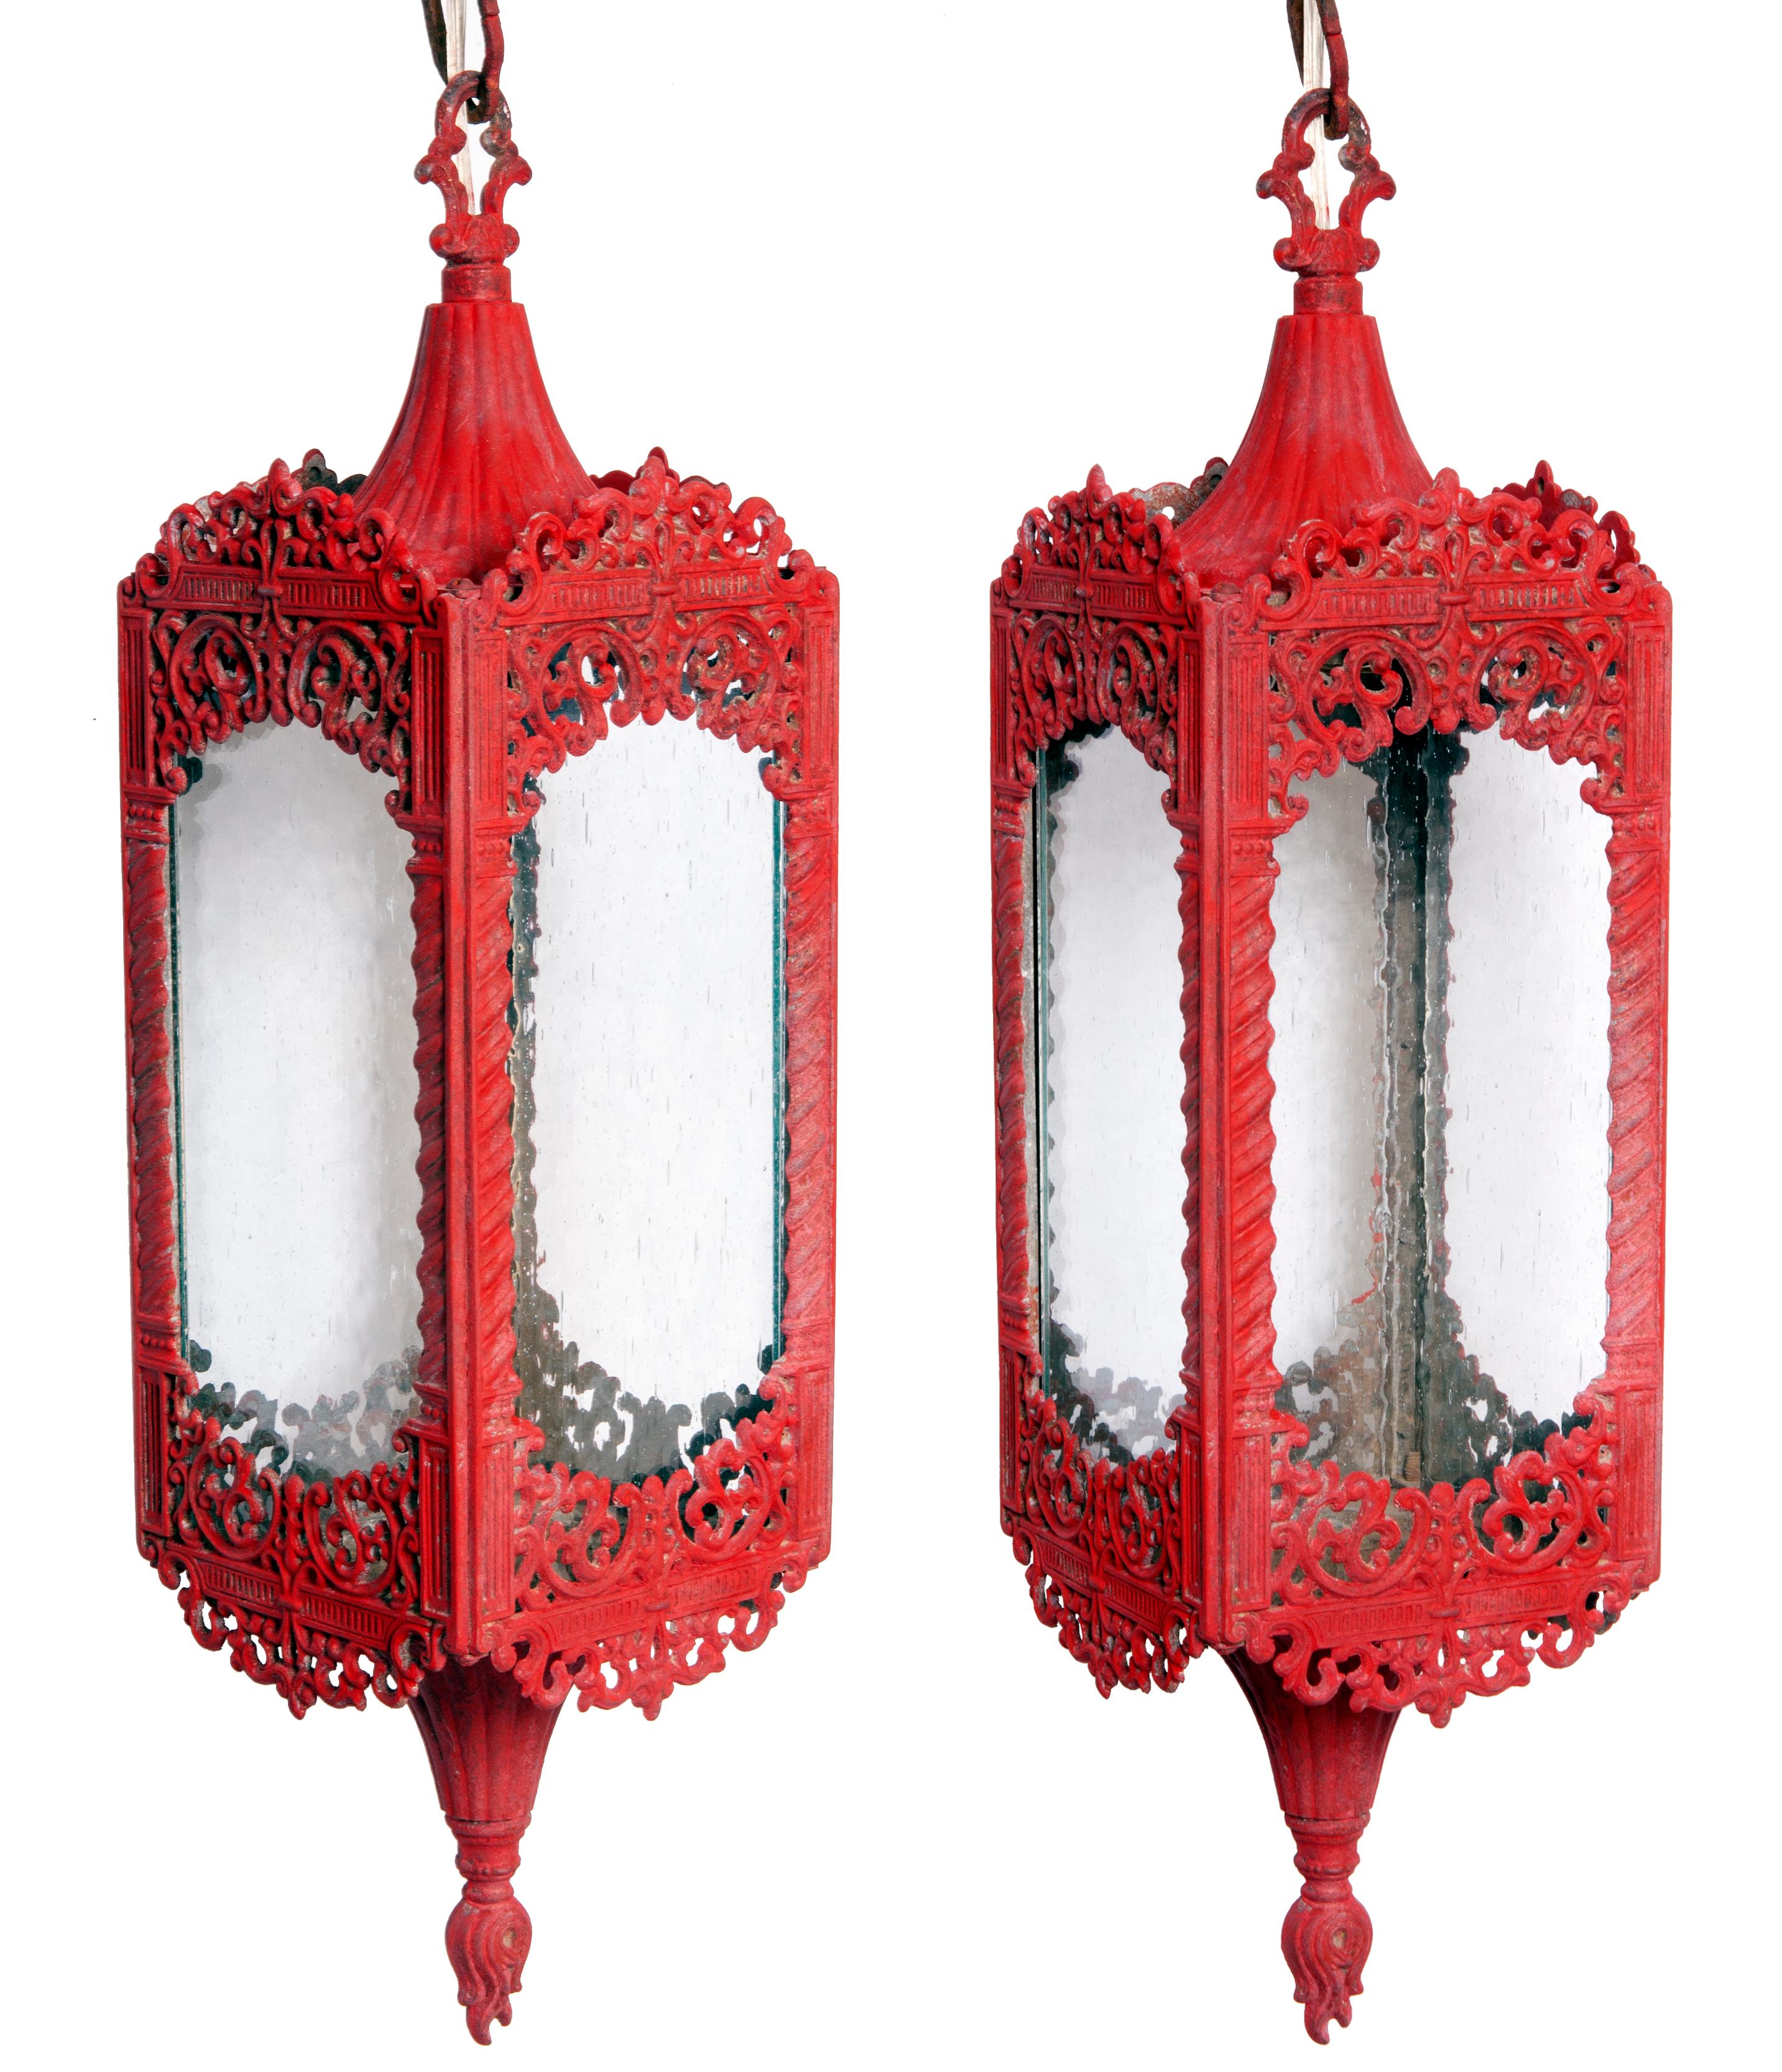 Mid-century Moorish style pendant lanterns with clear seeded glass panels & original chain. 
Lanterns are available in China red or matte black.
The lanterns feature intricate metal scroll work.
Restored & rewired with in line switch & plug for